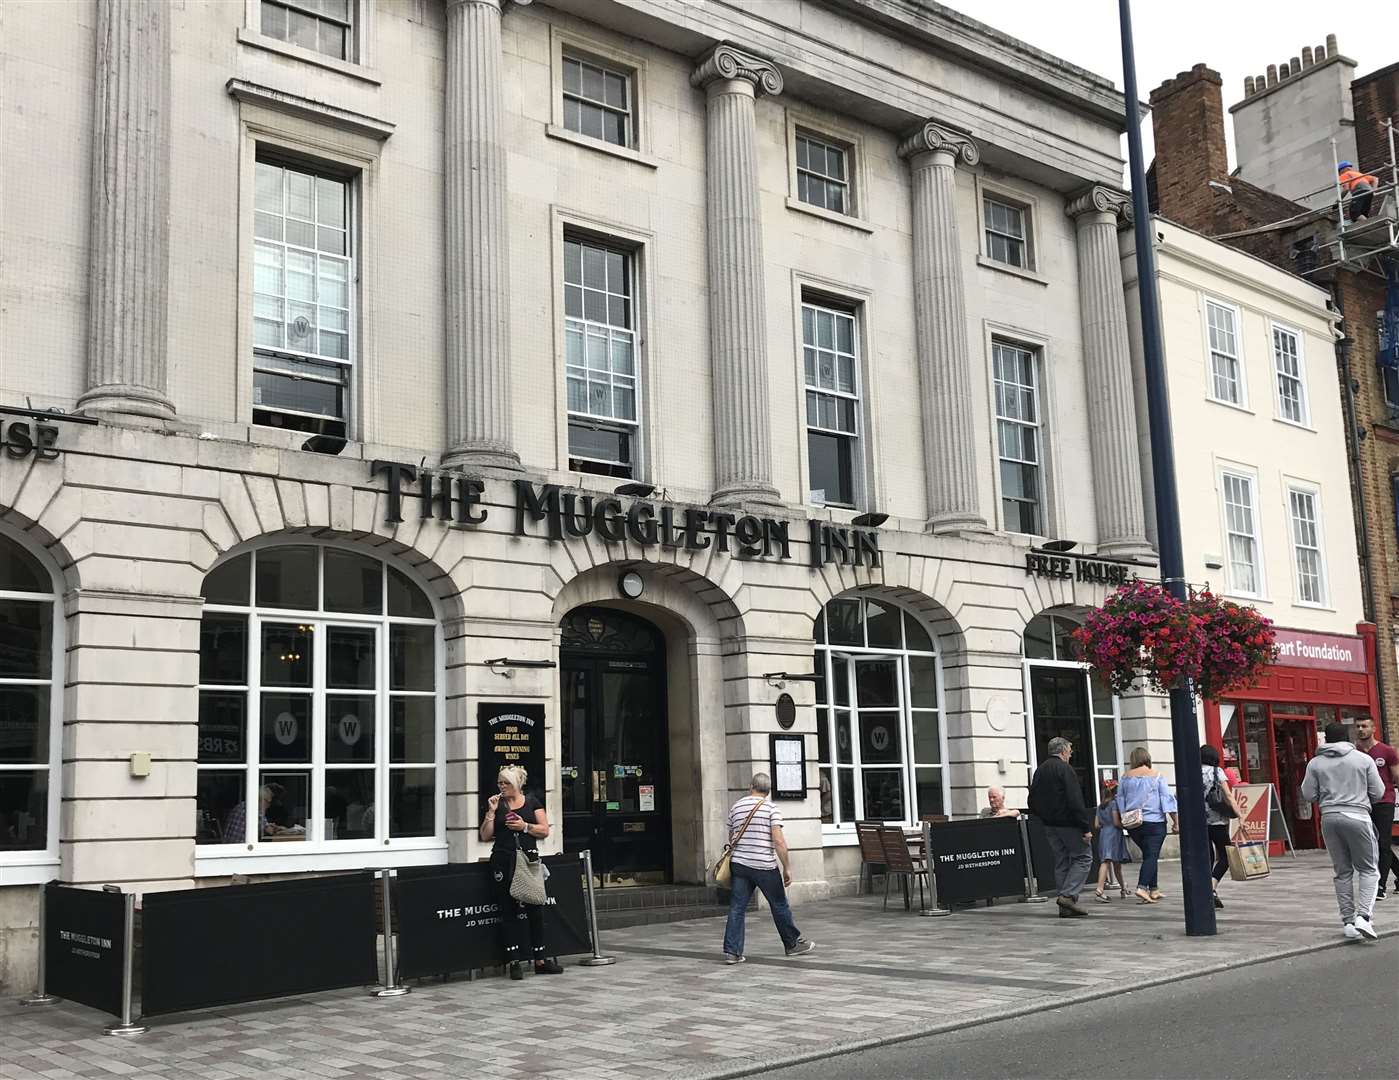 A row broke out between rival cab drivers after Channa was spotted touting for fares outside The Muggleton Inn Wetherspoon in Maidstone. Photo: Stock